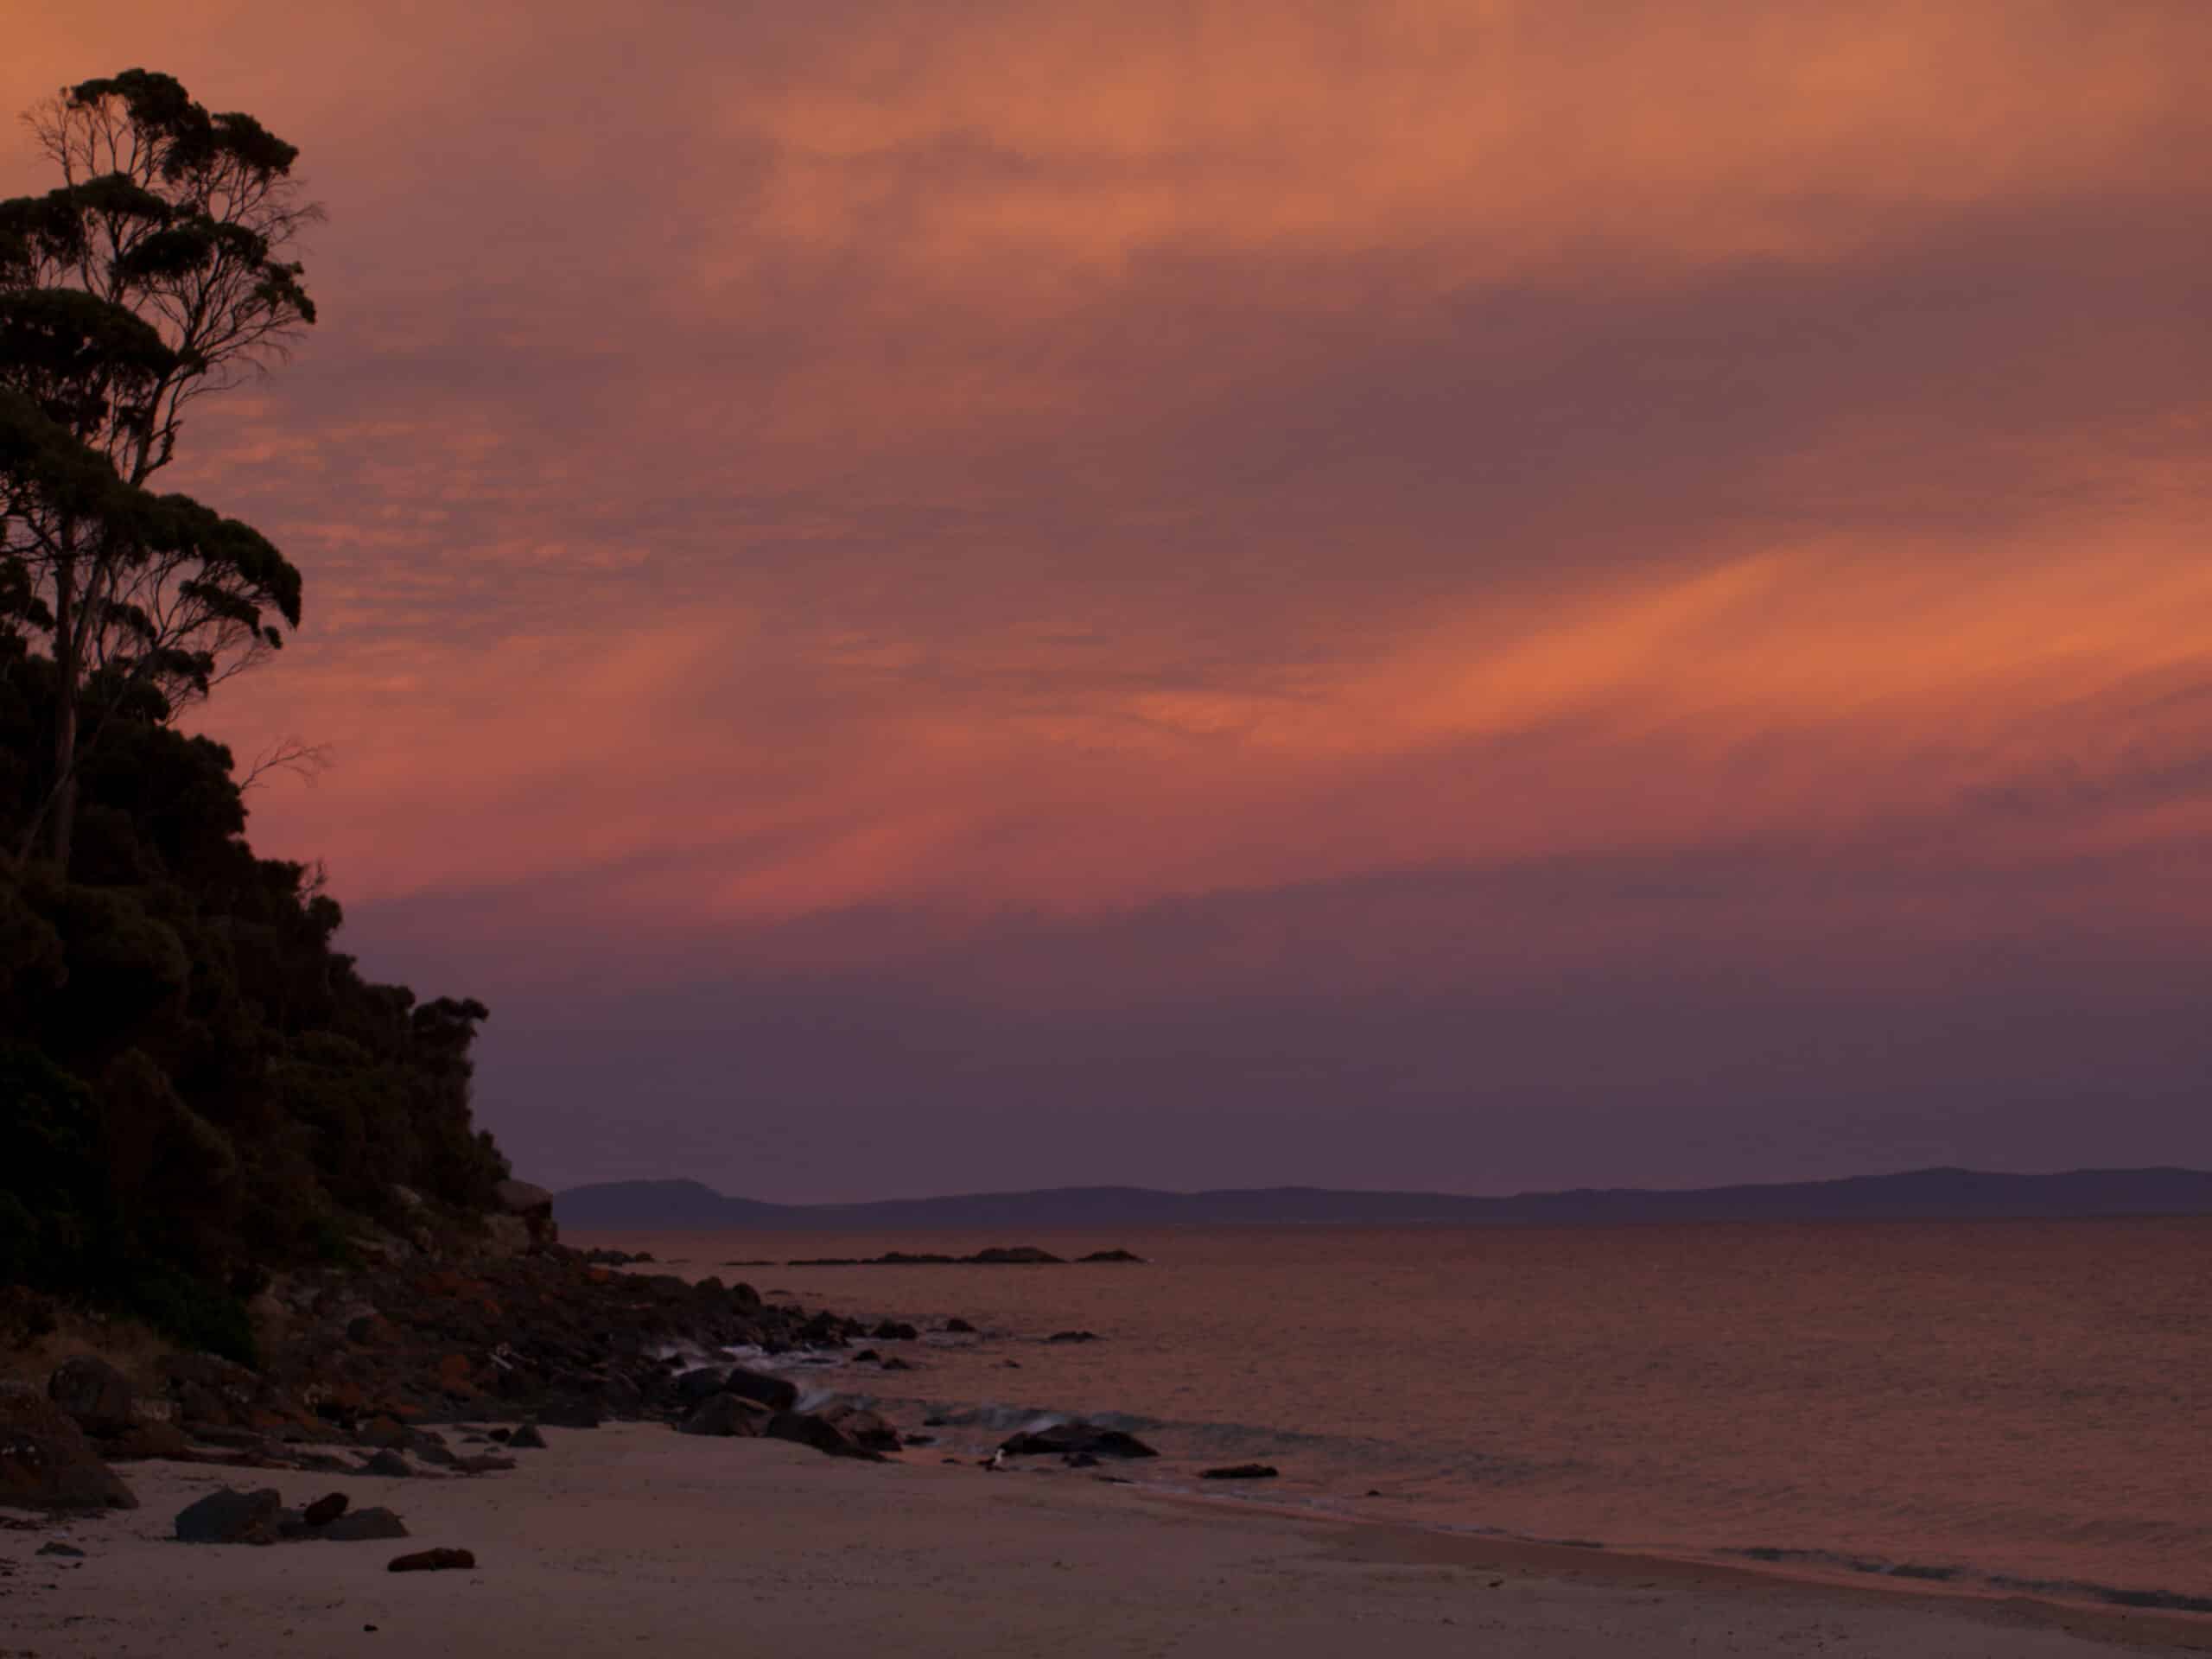 Sunset at Mayfield Bay Conservation Area - Looking East to Freycinet Peninsular